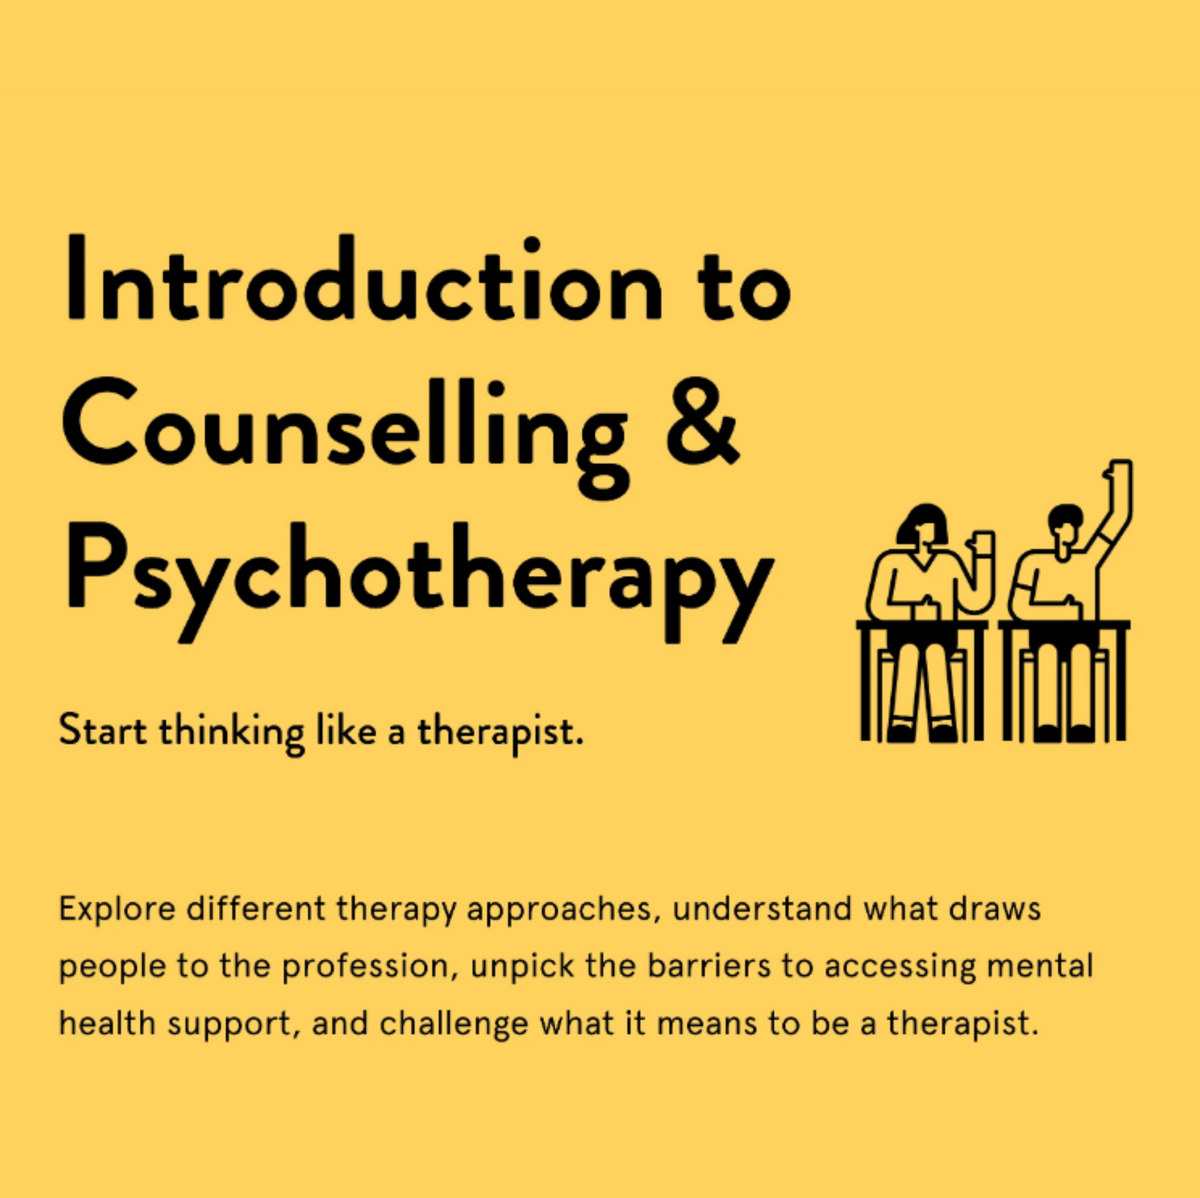 Introduction to Counselling & Psychotherapy Short Course (May)